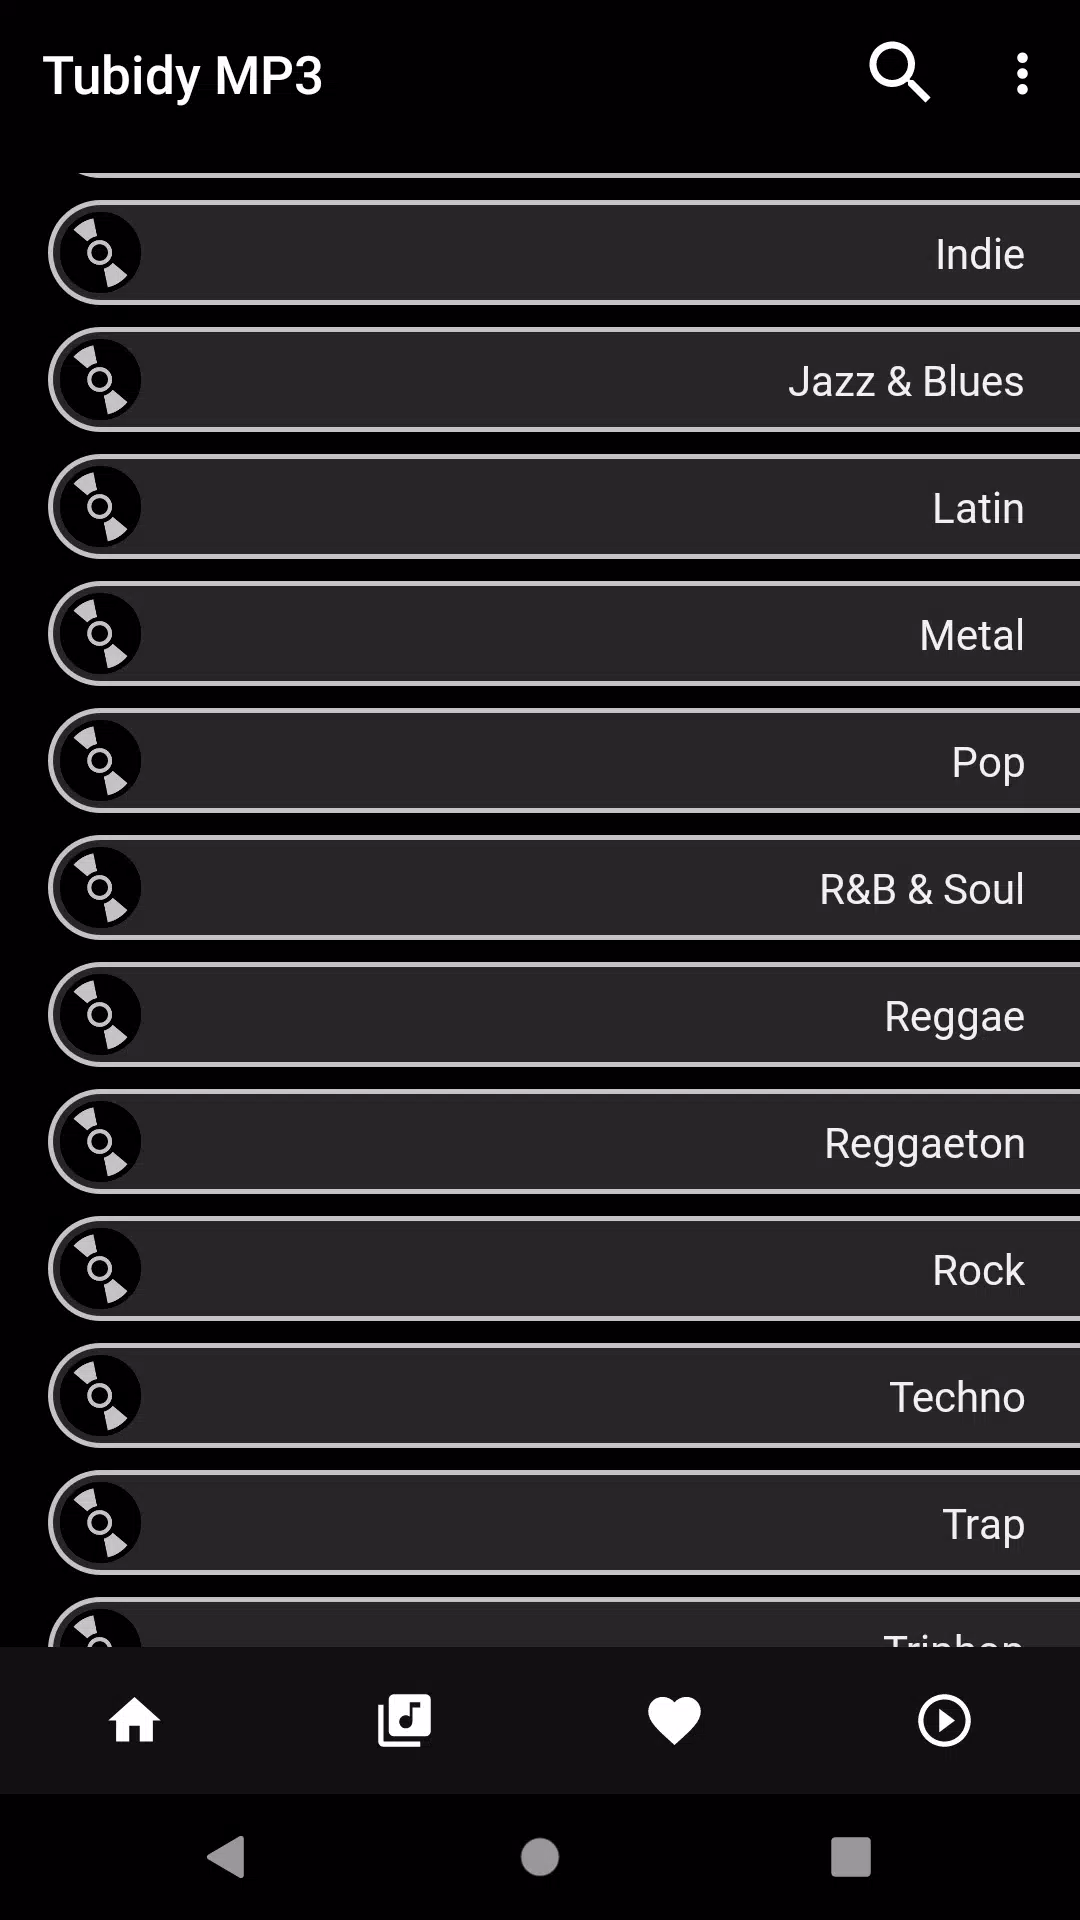 Tubidy Music: Tubidy MP3 APK pour Android Télécharger